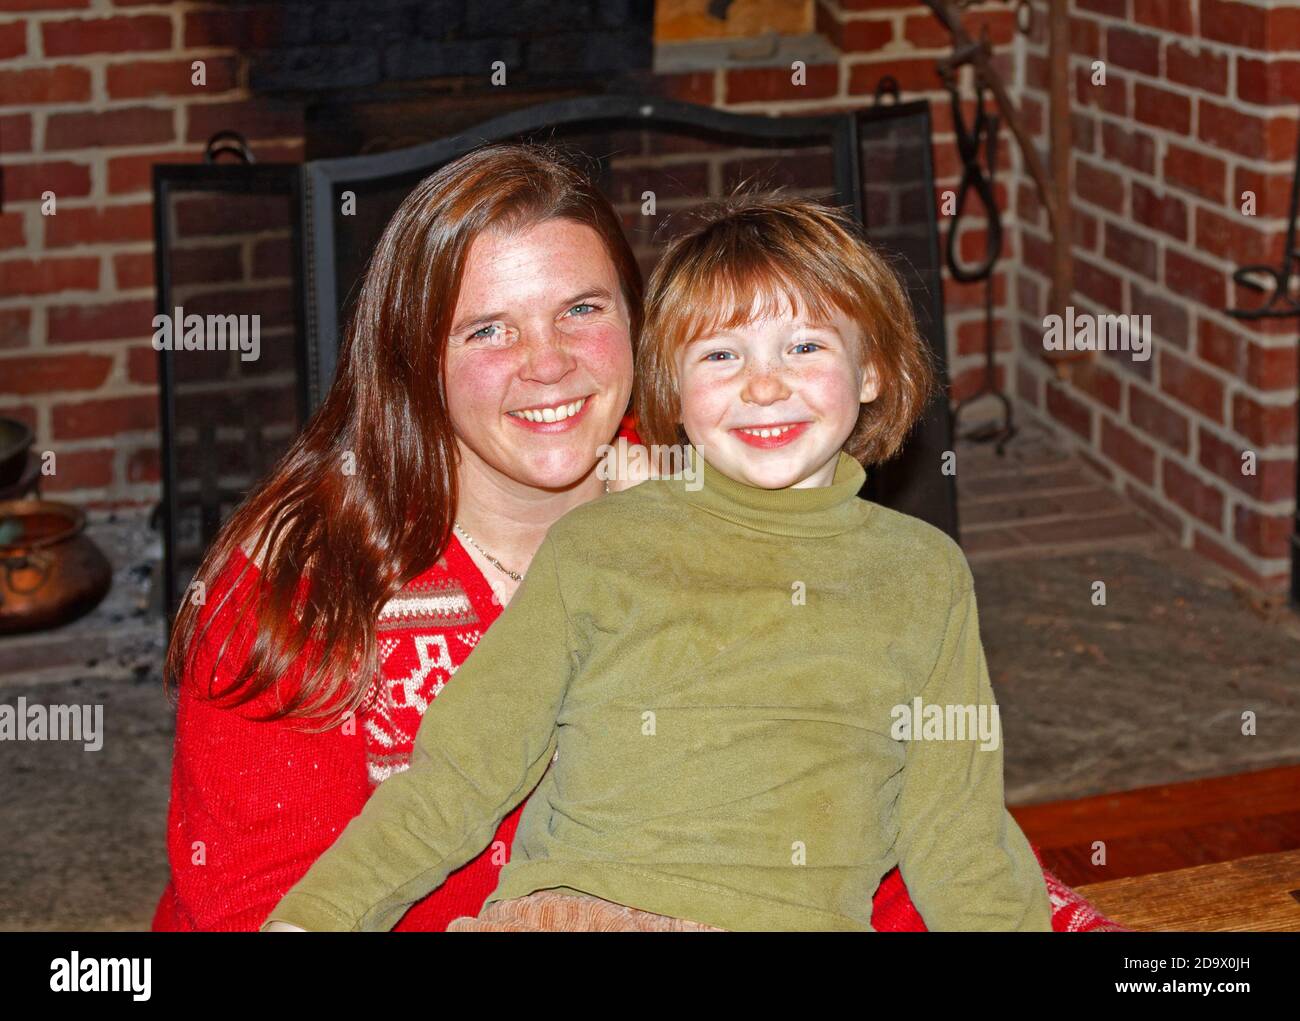 https://c8.alamy.com/comp/2D9X0JH/woman-young-boy-mother-long-lustrous-hair-son-pale-skin-smiling-happy-family-love-fireplace-mr-2D9X0JH.jpg